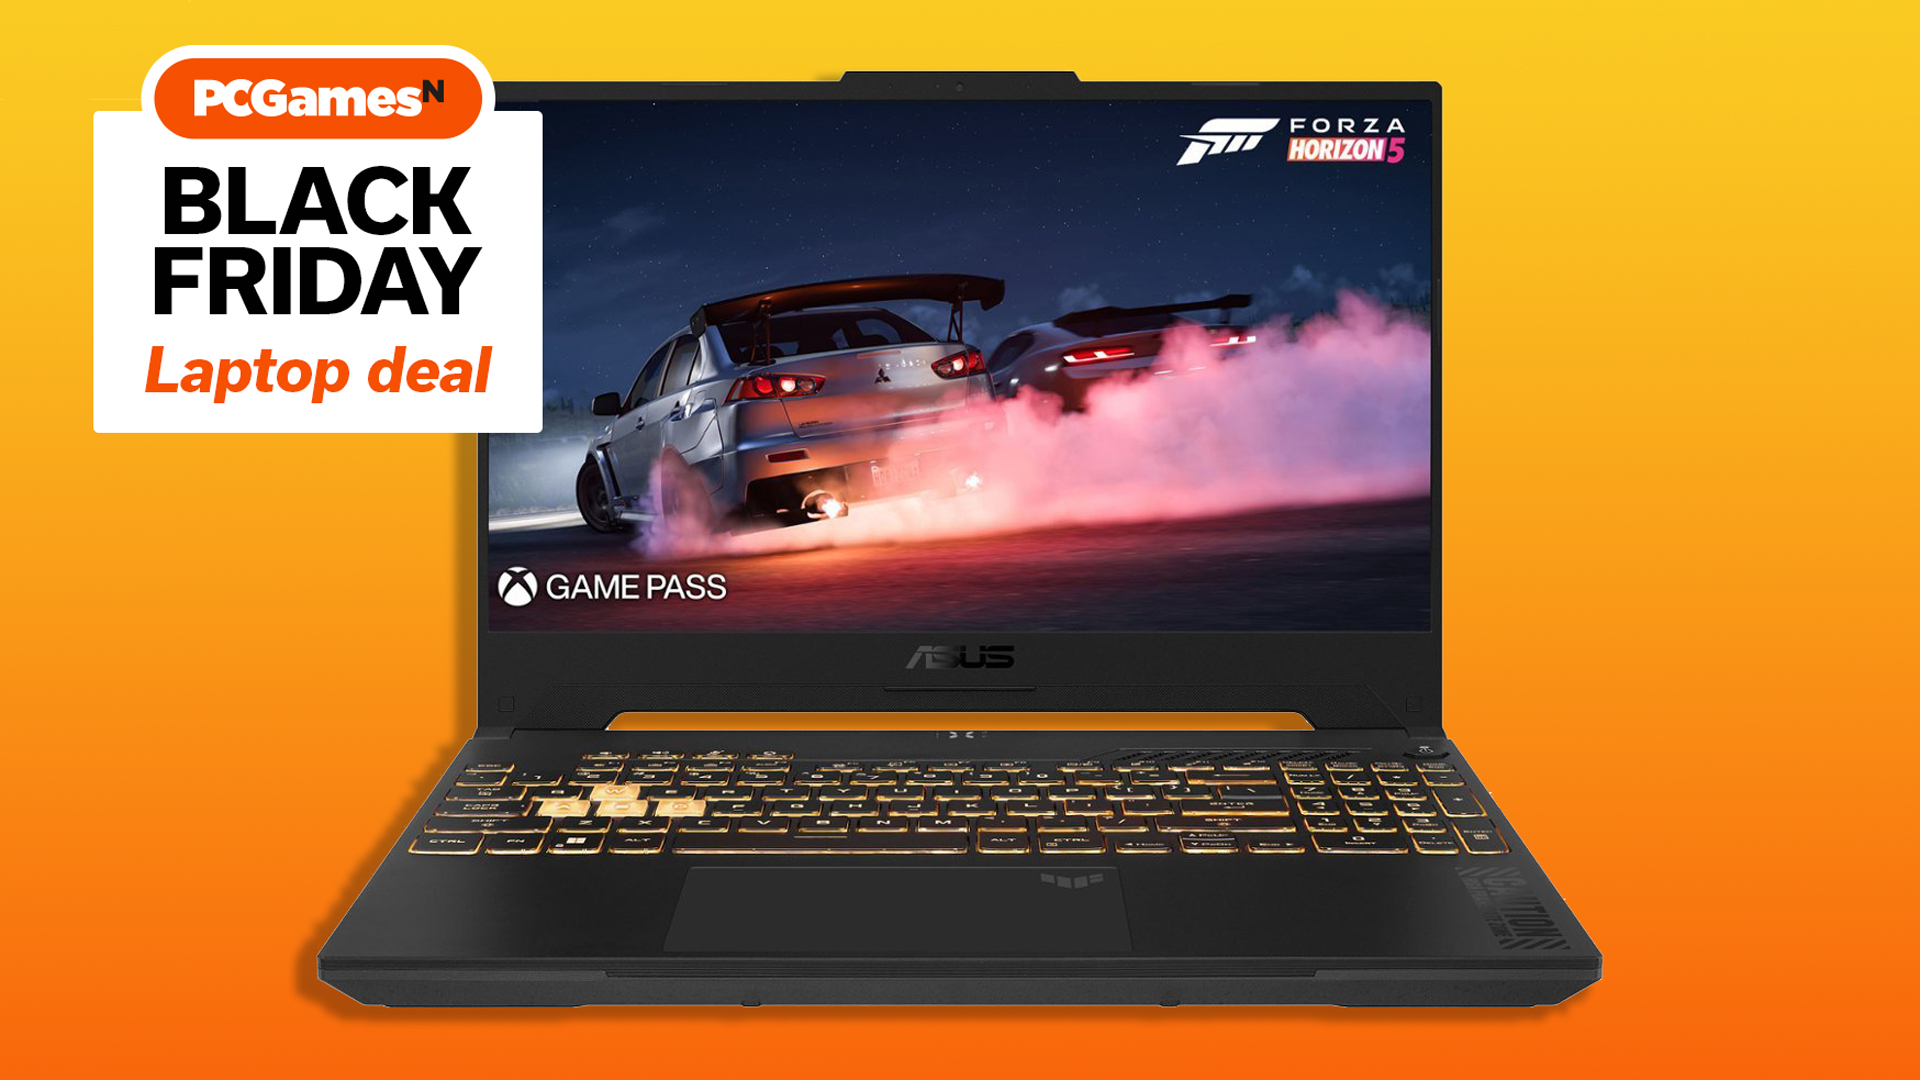 You should be excited about this gaming laptop deal at Best Buy